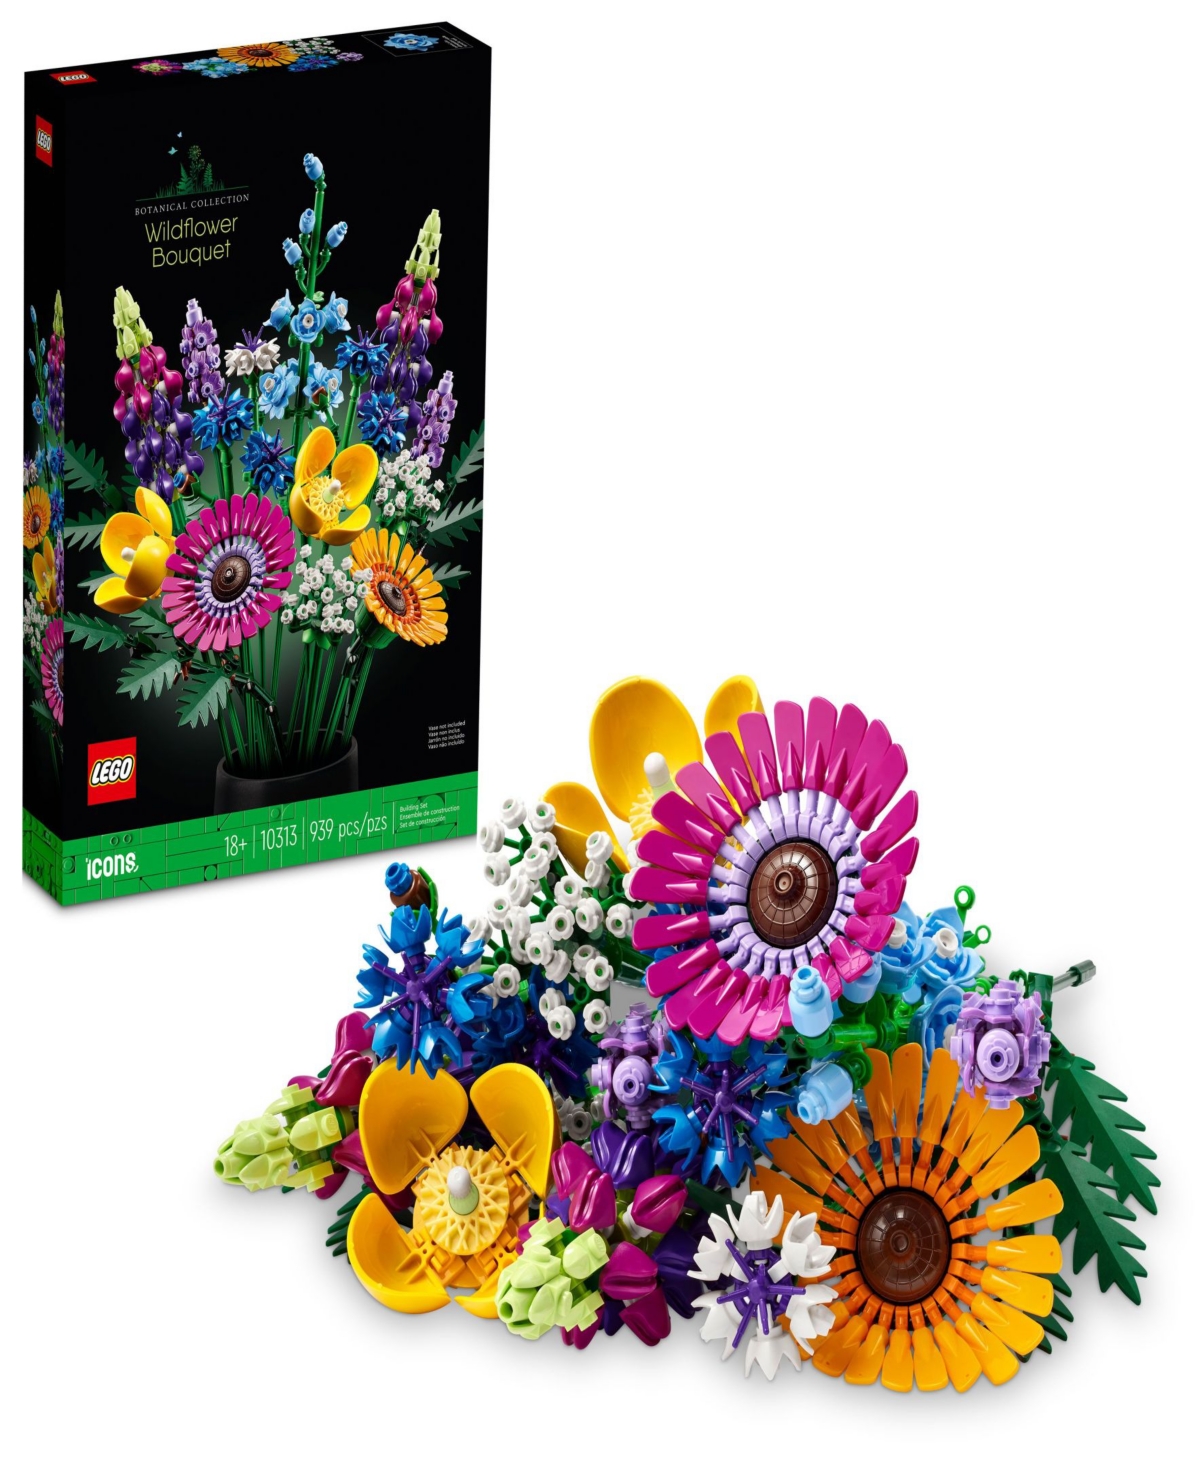 Lego Icons 10313 Wildflower Bouquet Adult Toy Floral Building Set In Multicolor